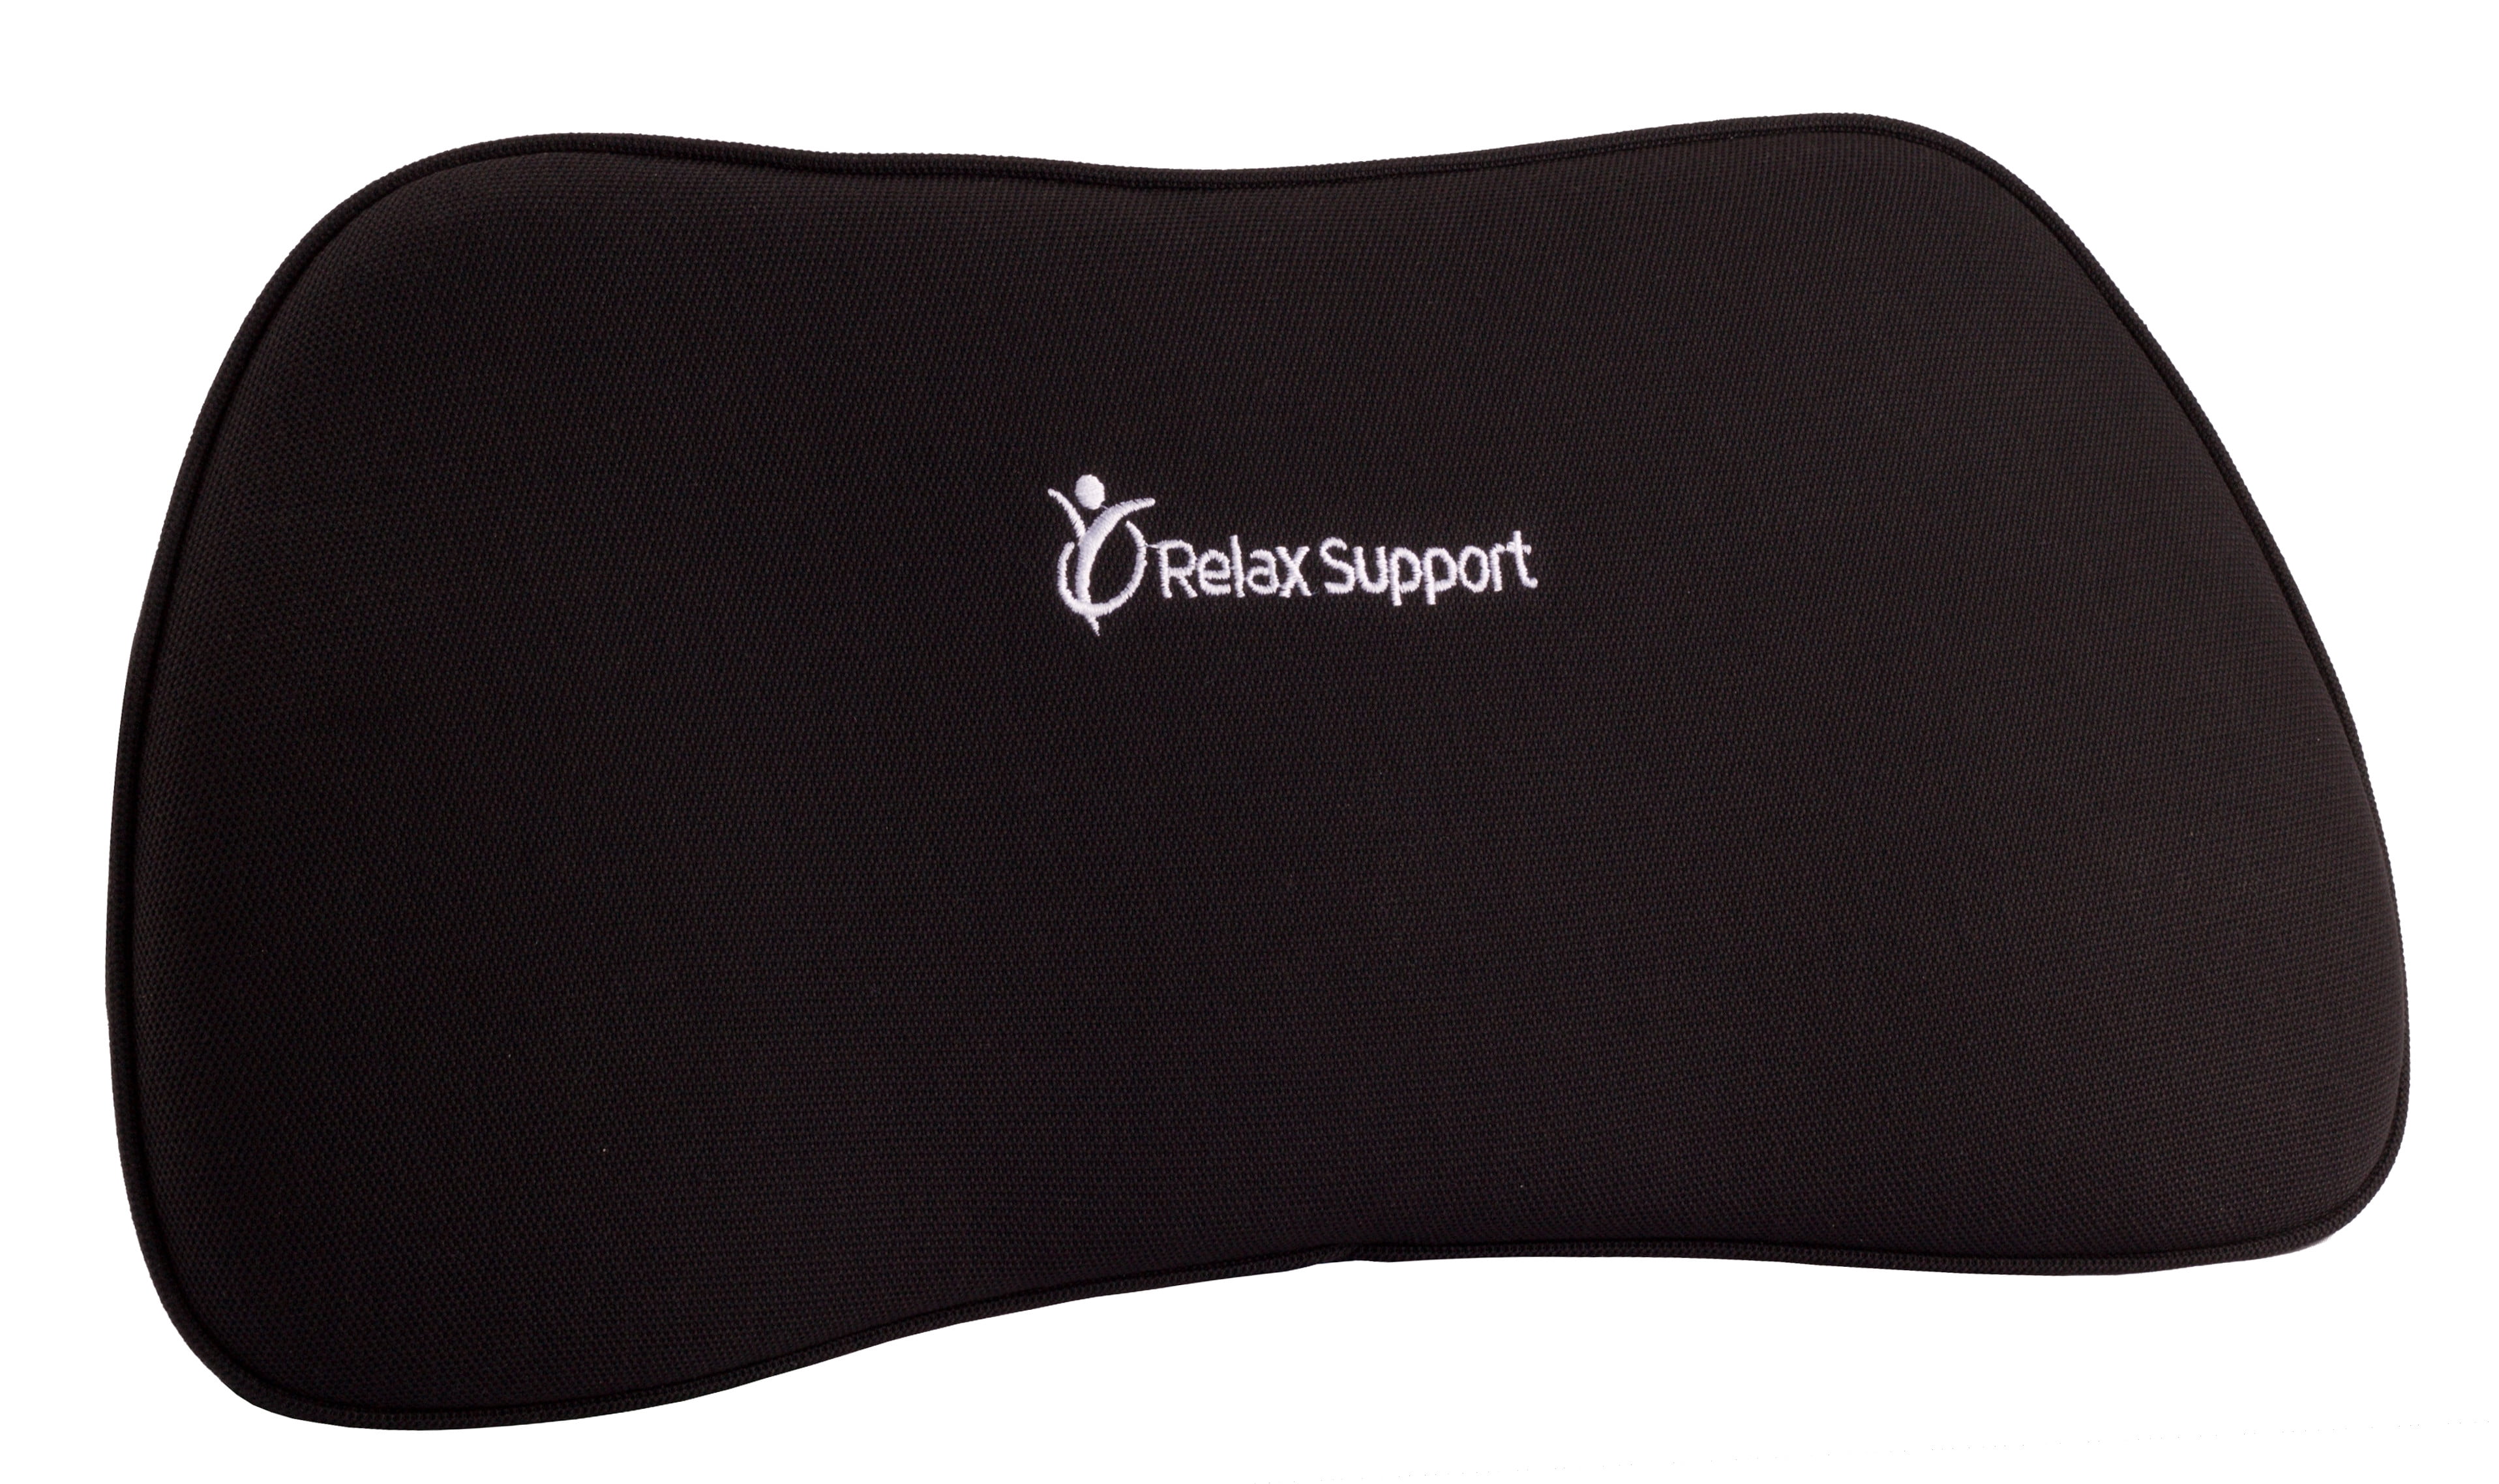 Relax Support RS11-X Lumbar Support Pillow - Medium Firm Memory Foam Office Chair Back Support - Promotes Spinal Alignment & Better Posture - Non-Slip